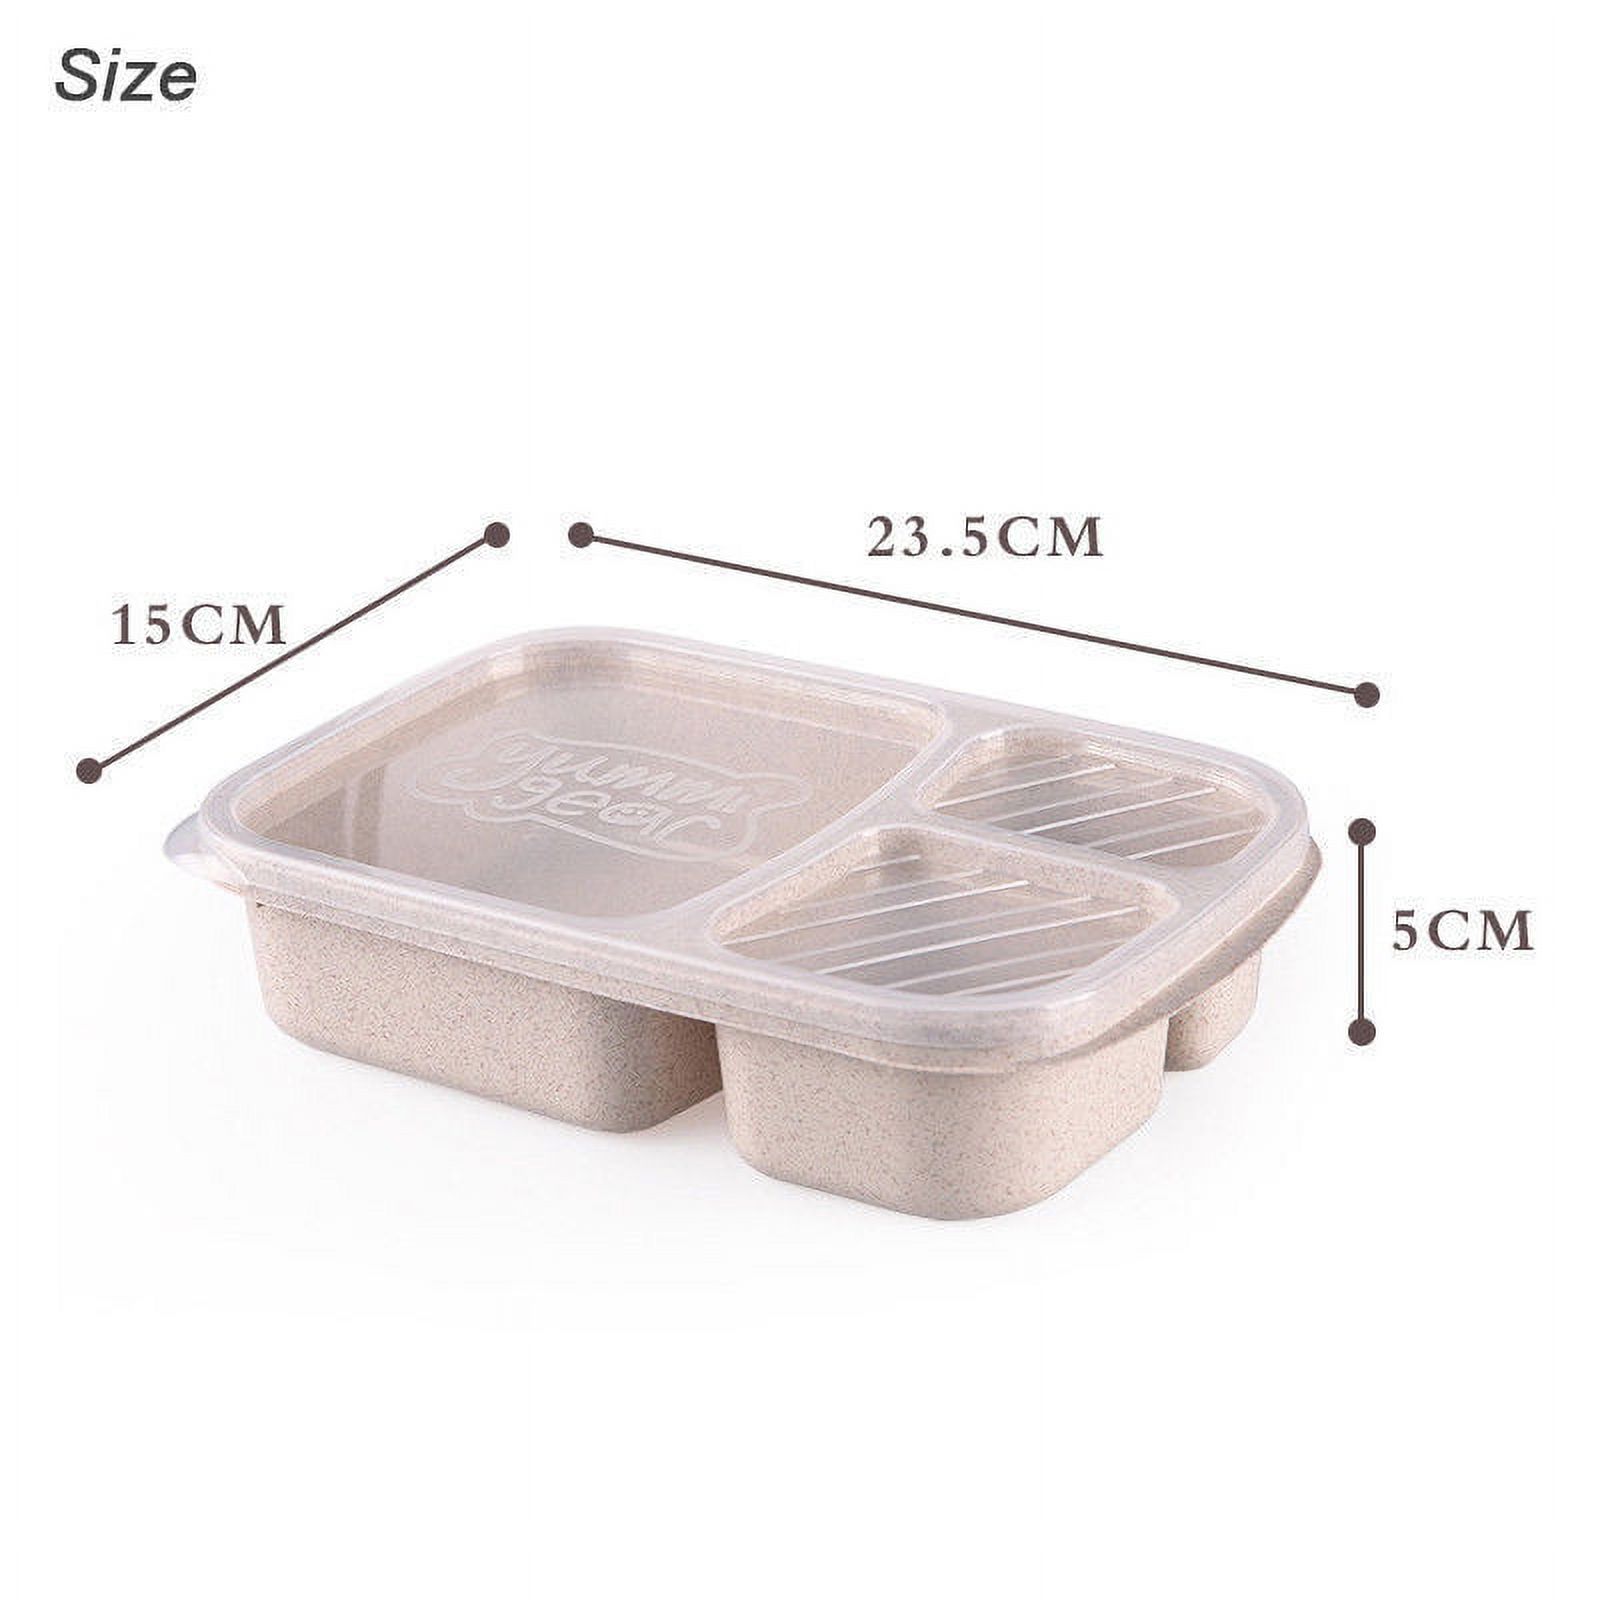 3 Layer Plastic Lunch Box Food Container Bento Lunch Boxes With 3-Compartment Microwave Picnic Food Container Storage Box - image 2 of 5